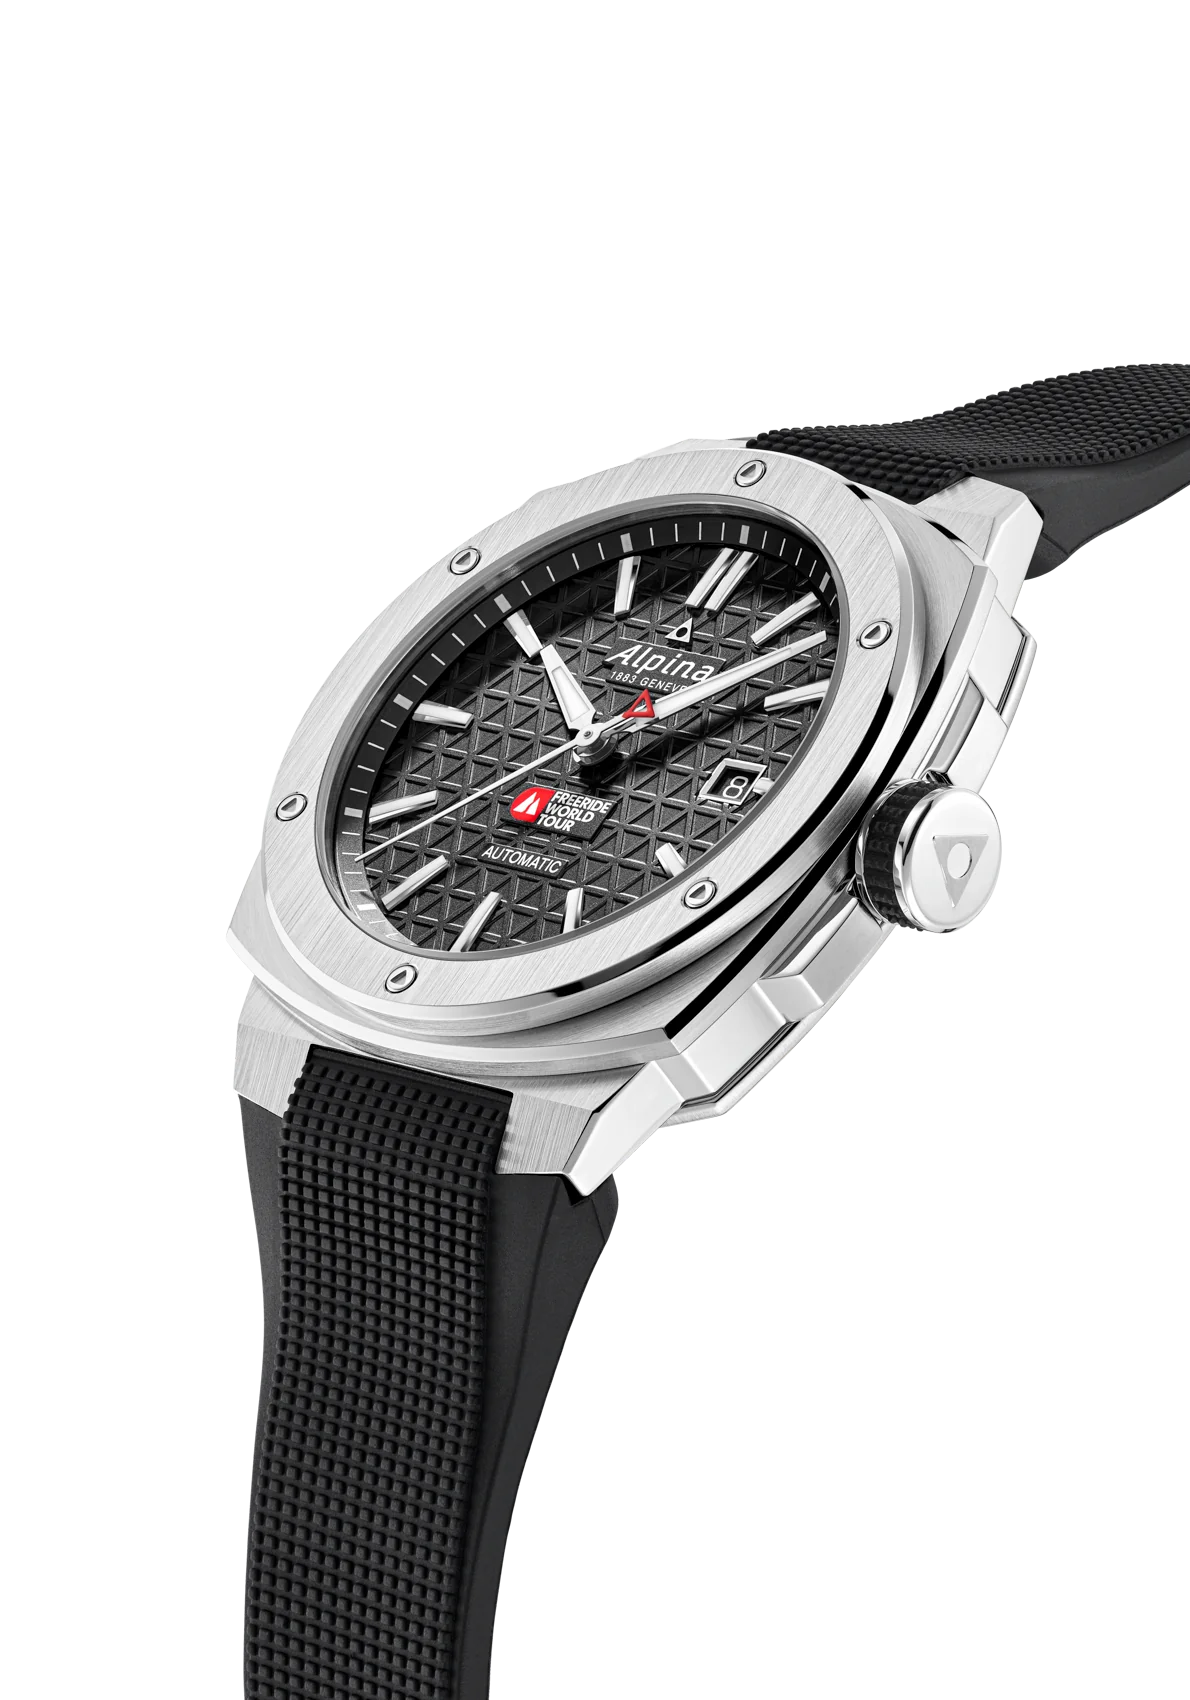 Alpina Alpiner Extreme Automatic Freeride World Tour (Black Dial / 41mm)